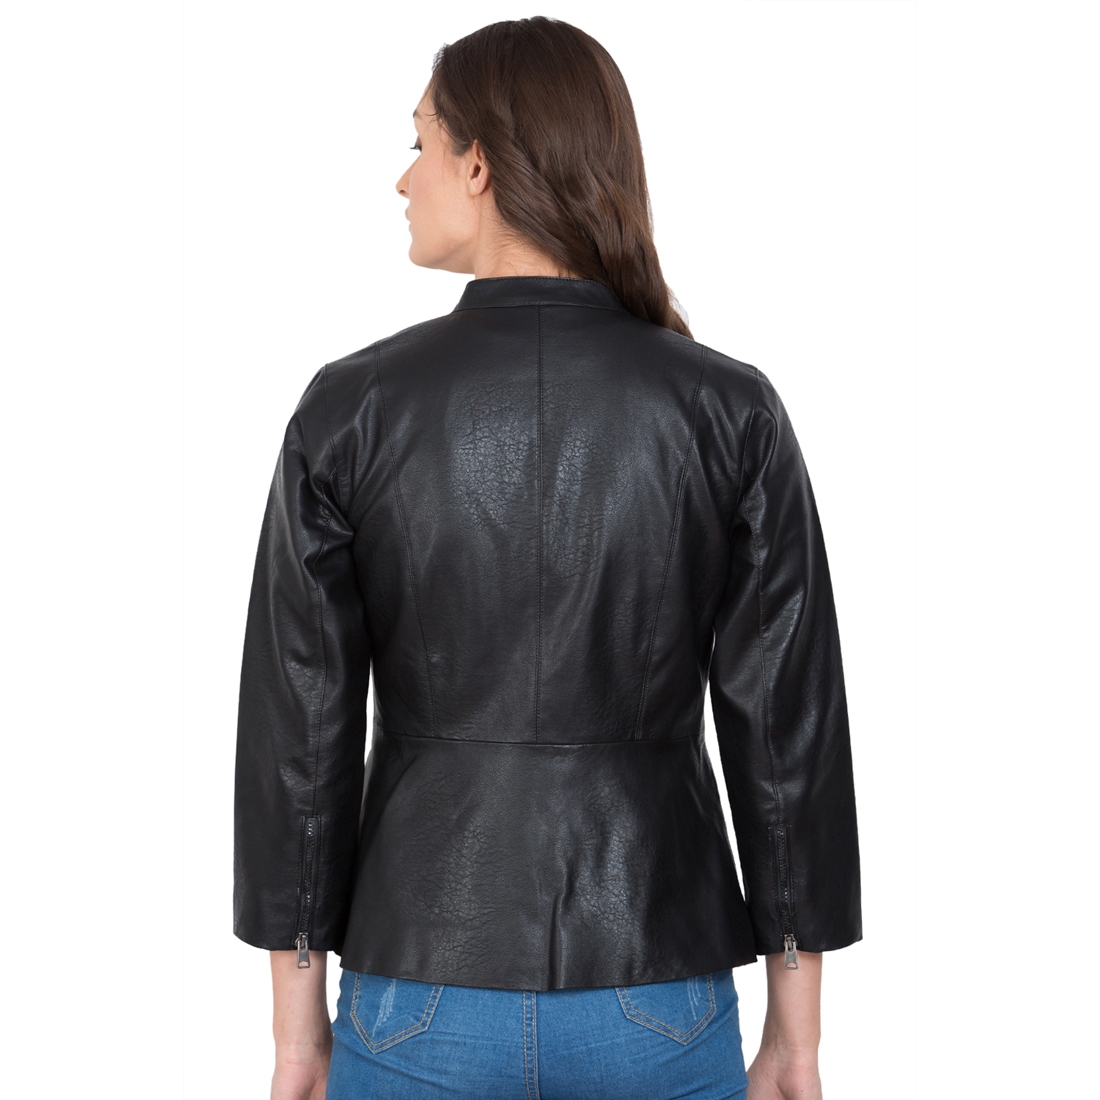 Justanned | JUSTANNED RAVEN WOMEN LEATHER JACKET 4